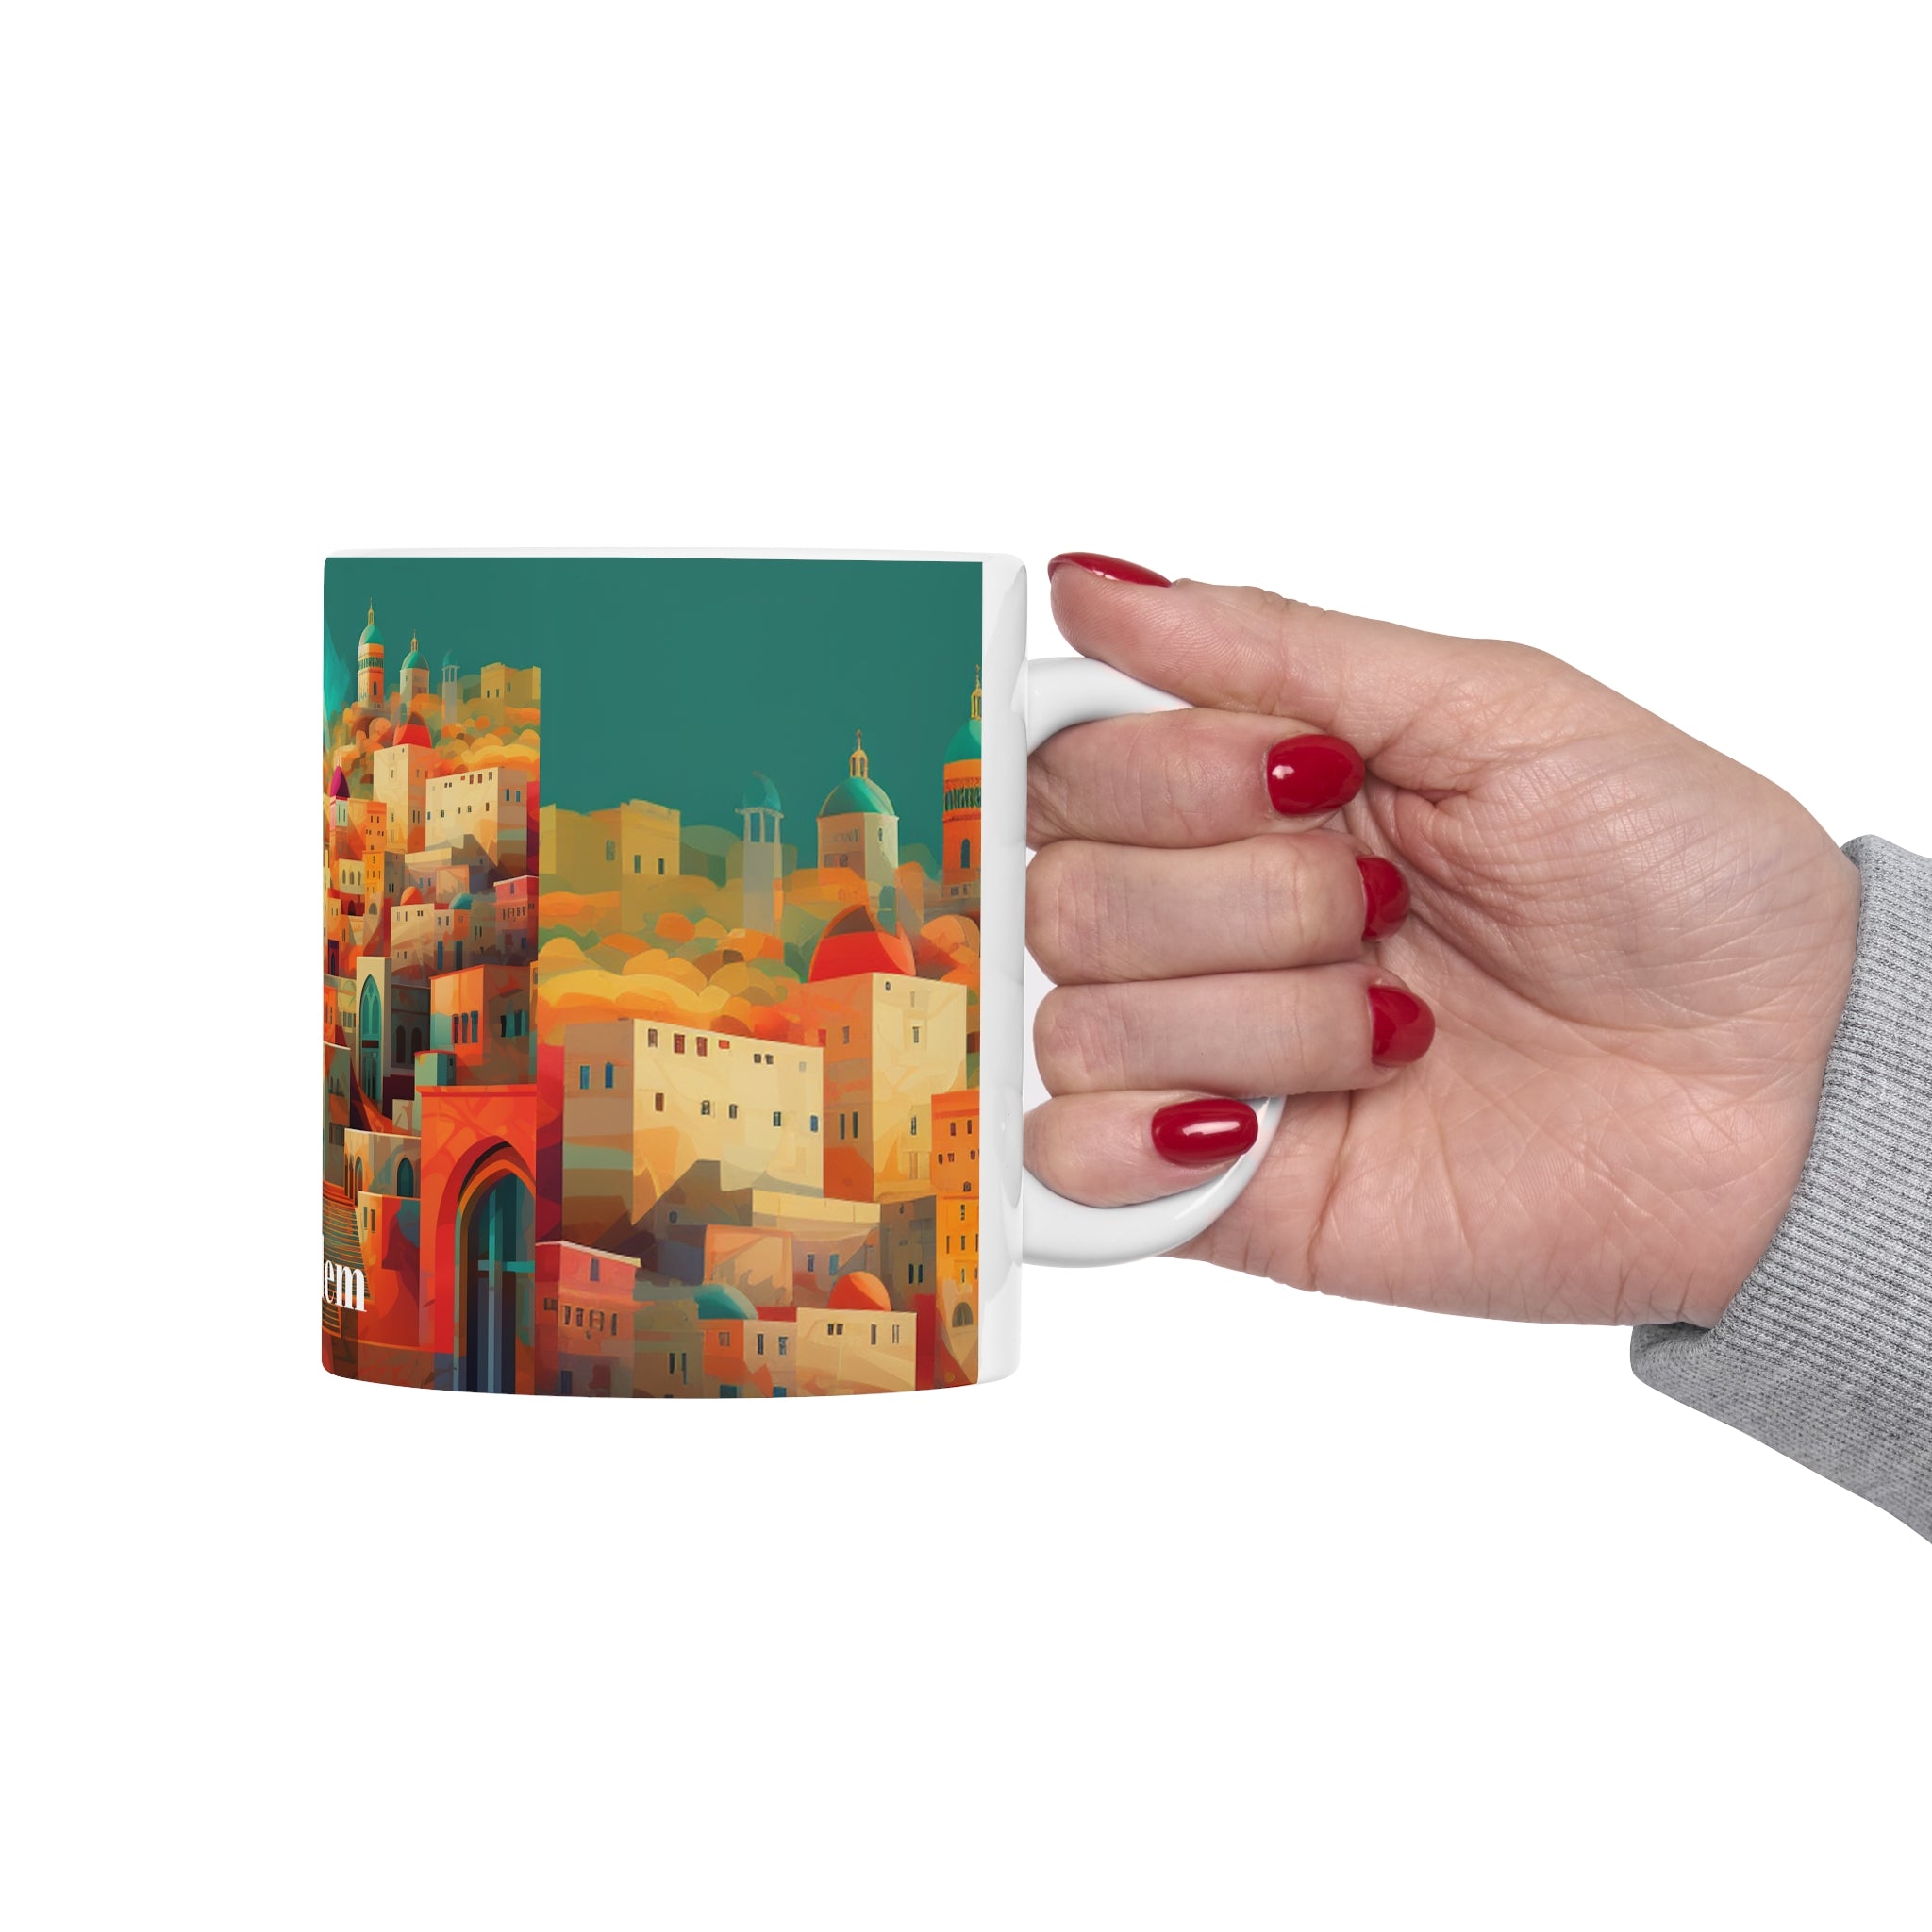 Experience the Beauty of Jerusalem with Our Abstract Ceramic Mug 11oz - Perfect for Coffee and Tea Lovers